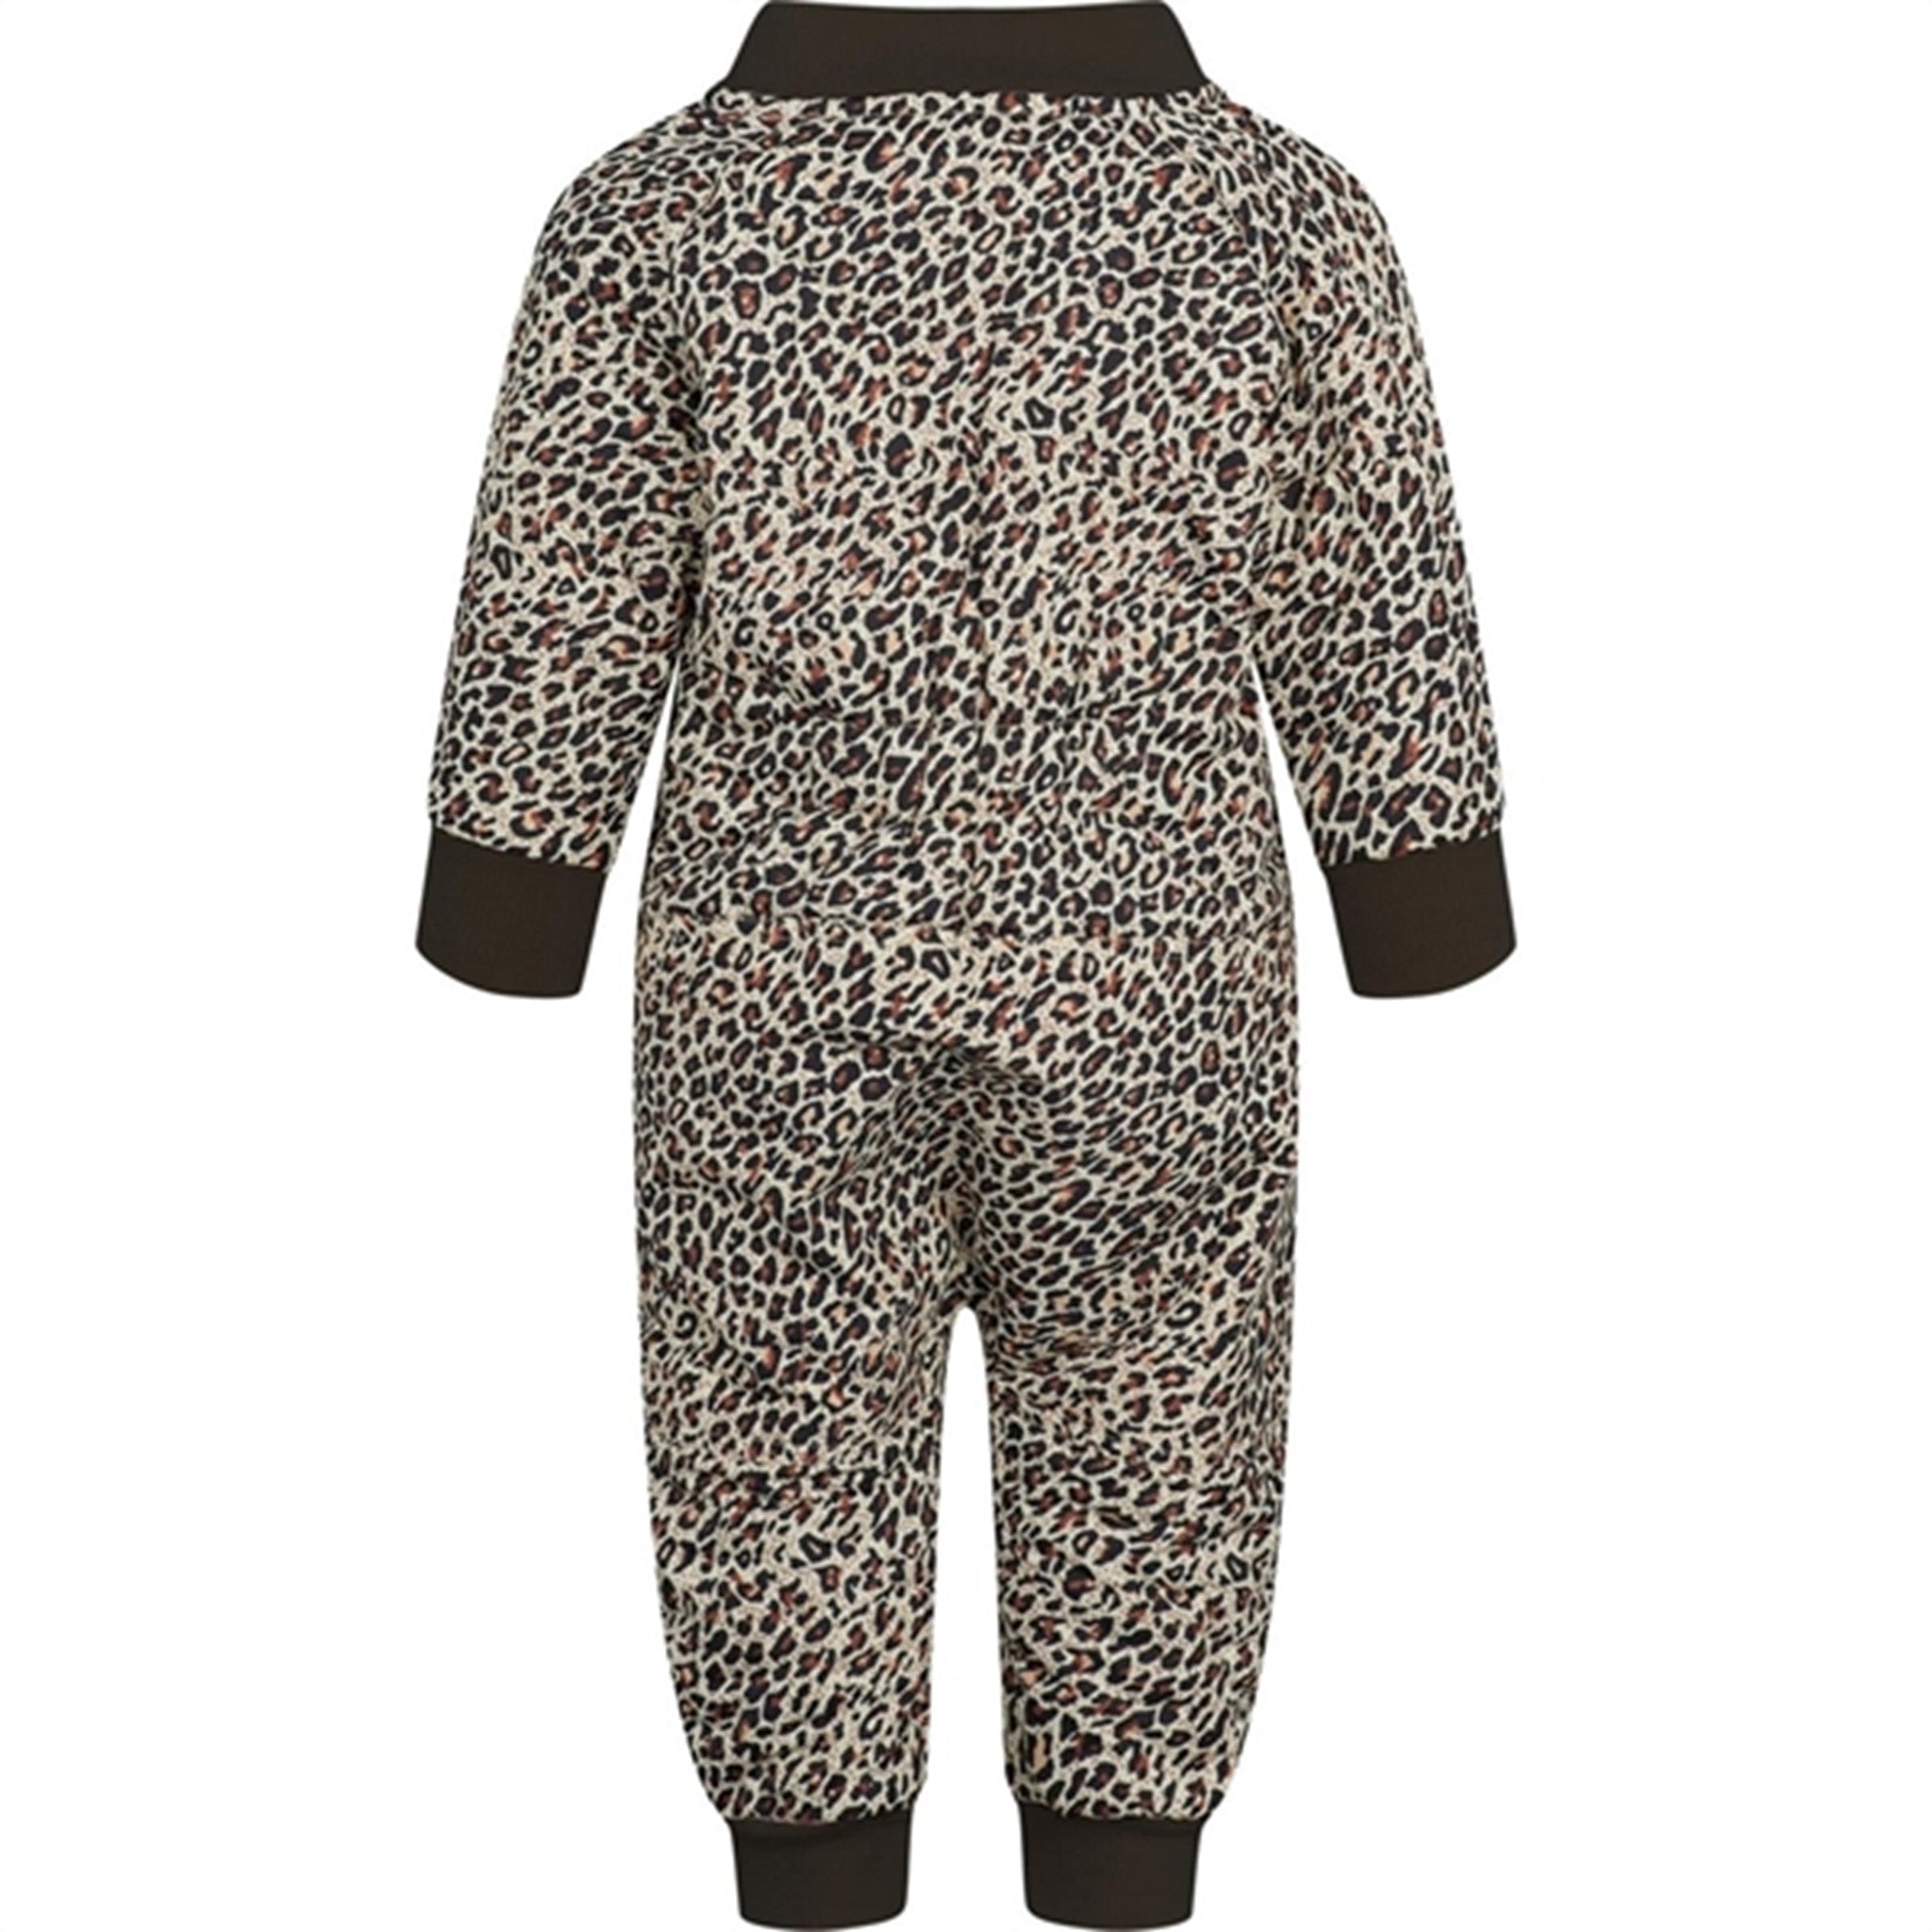 MarMar Leopard Oza Thermo Suit 2